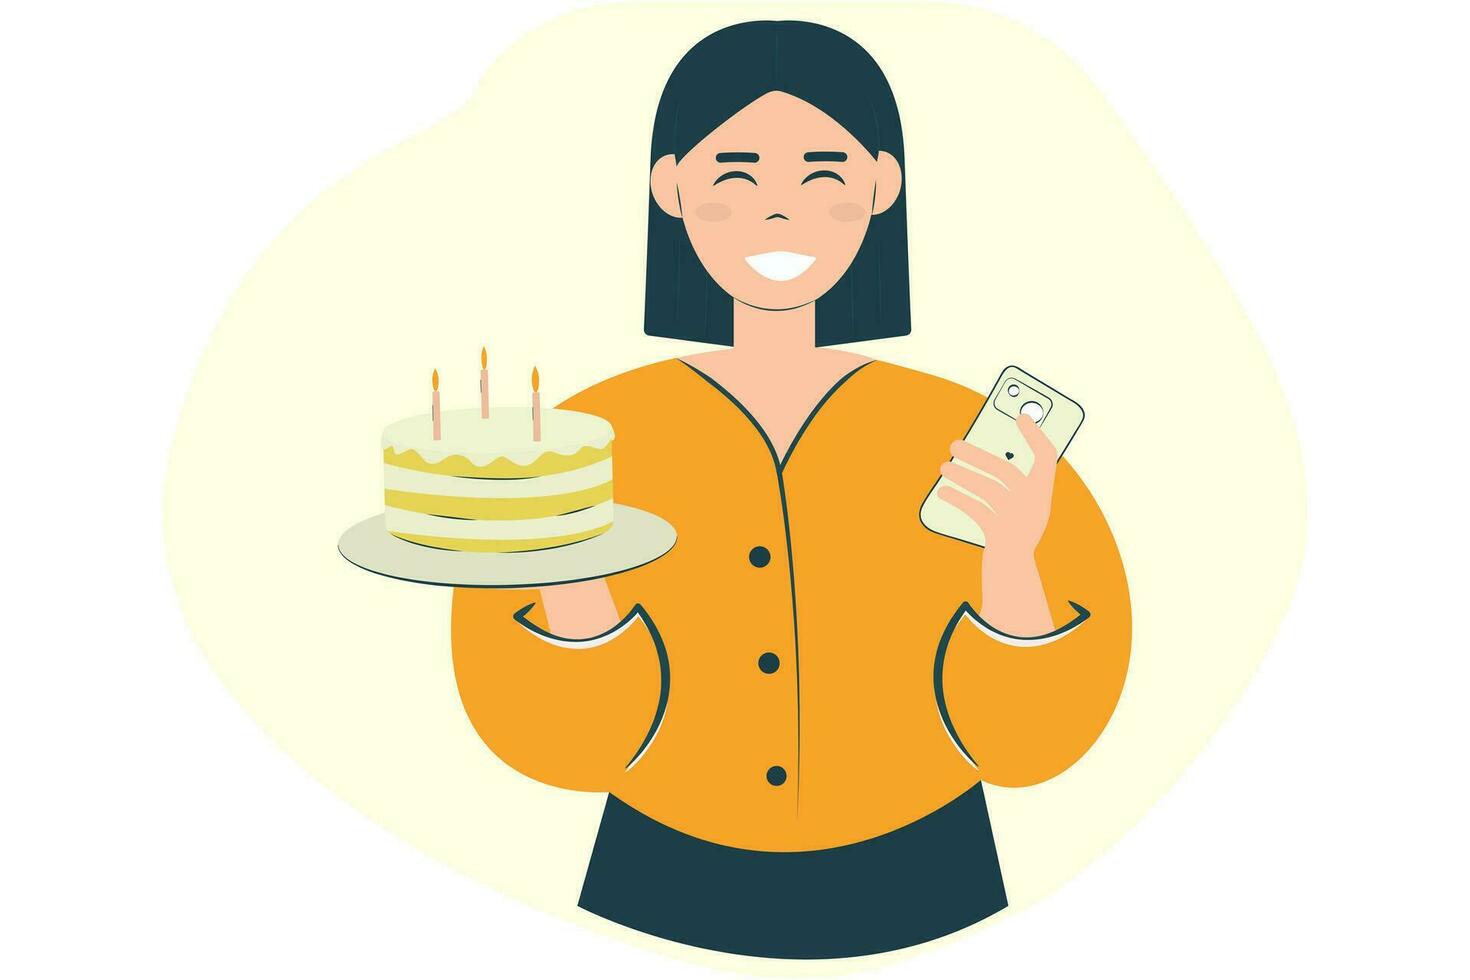 Happy young woman holding cake with candles using mobile mobile phone, isolated on plain background. Birthday concept vector